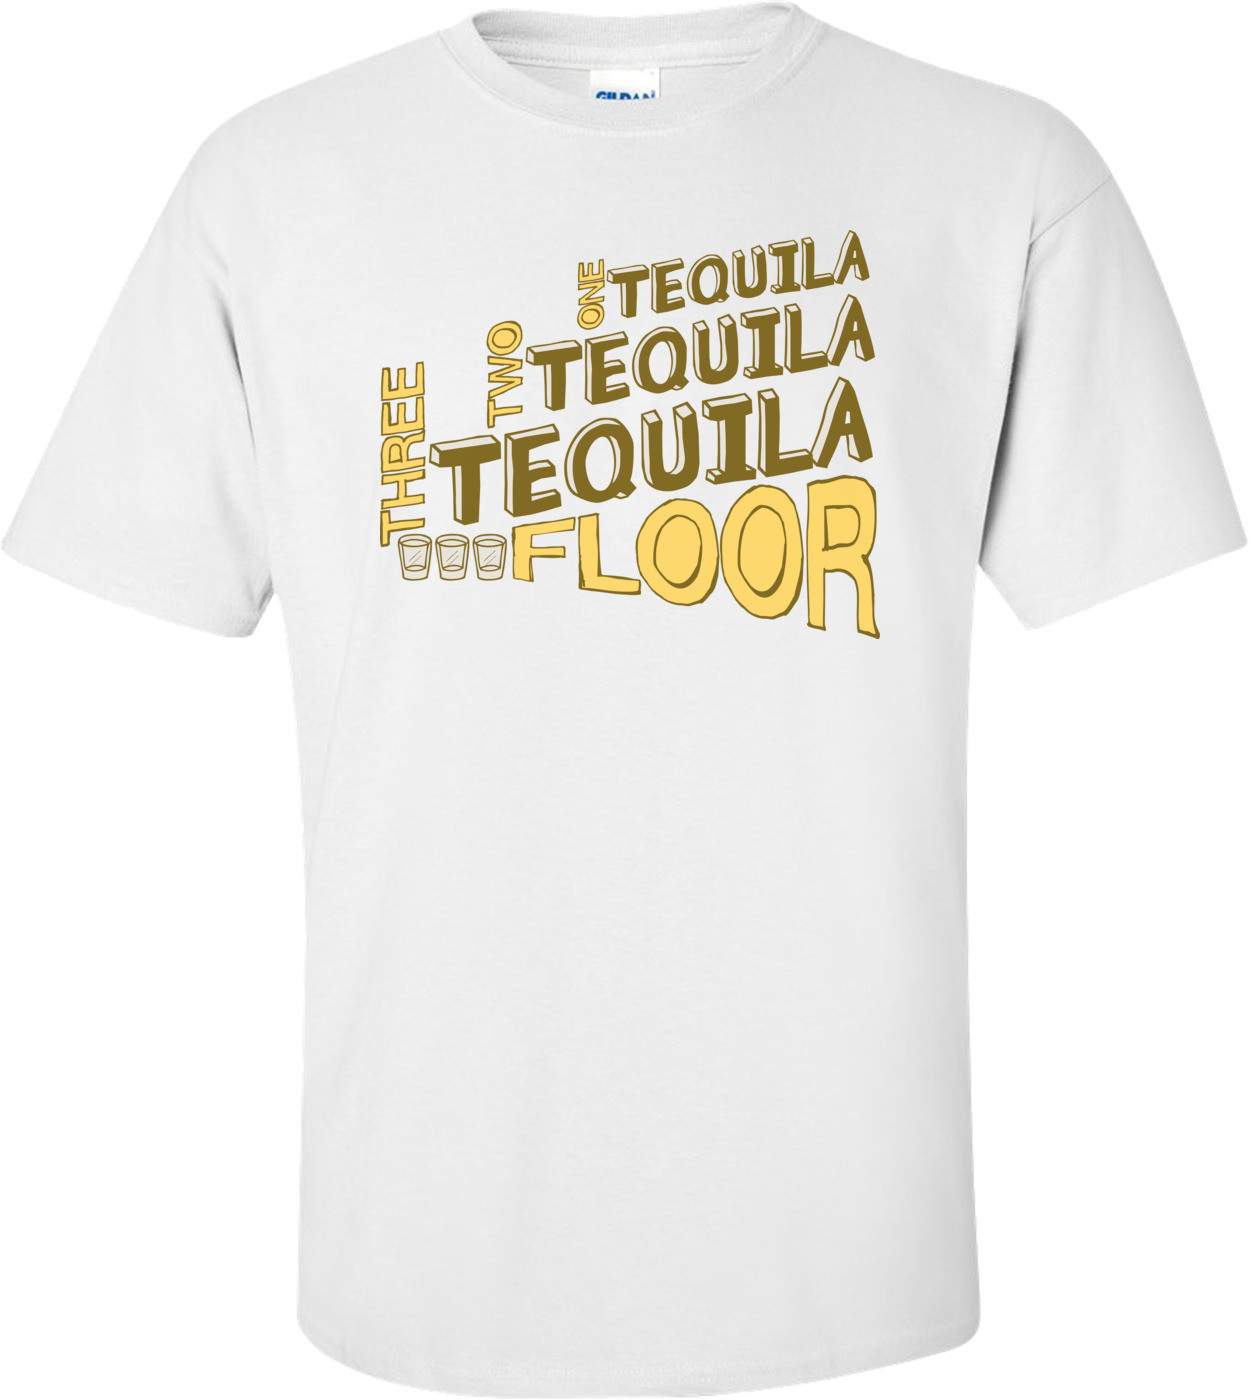 One Tequila Two Tequila Three Tequila Floor T-shirt